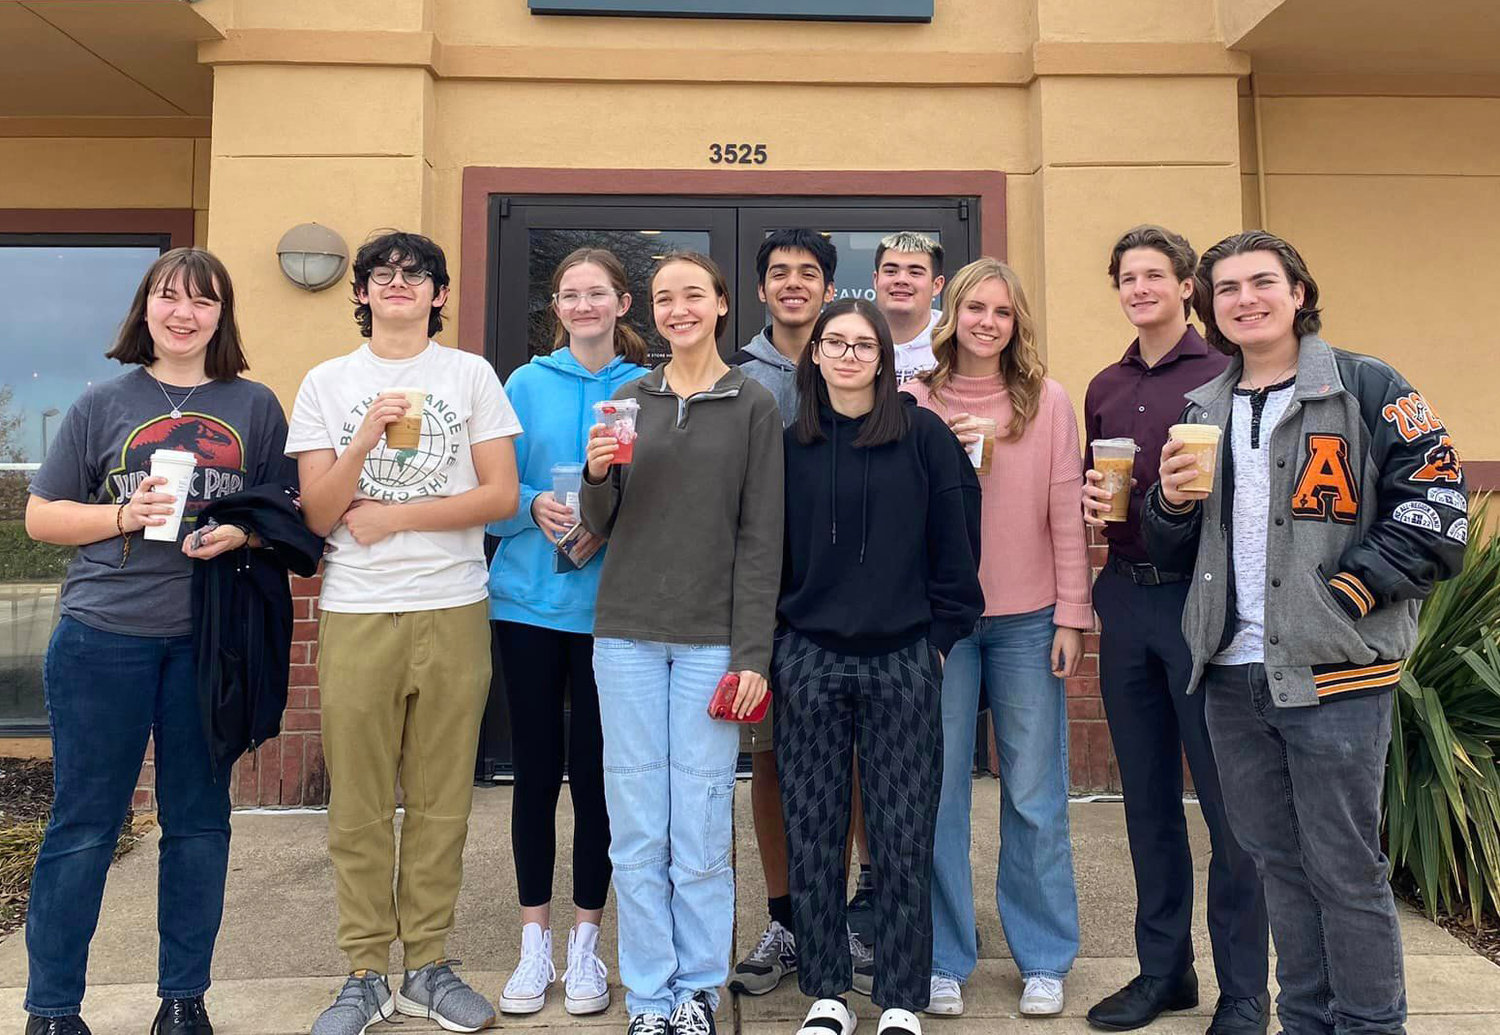 All Area Band members from Aledo High School are (front row, from left) Allison Maruschak, Garhett Daves, Isabella Stamper, Samantha Elston, and Jackson Schneider and (back row) Anna Carpenter, Marco Nava, Luke Shelton, Jane Claire Anderson, and Scott Mason.